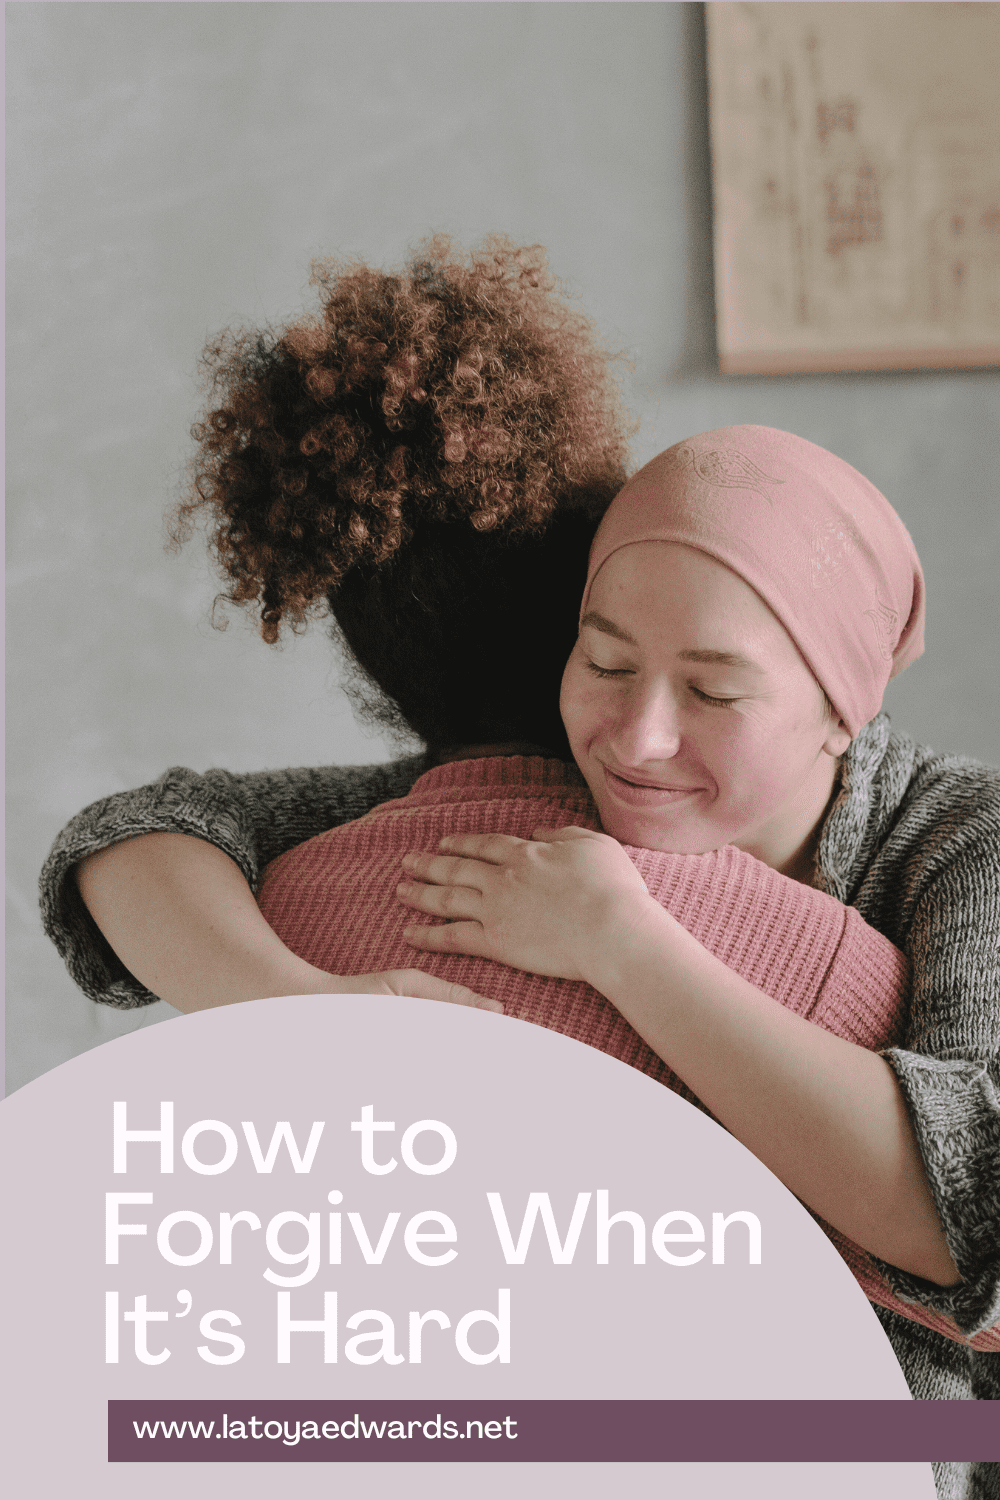 Want to learn how to forgive someone when it's hard? Learn the step-by-step process to being able to let go of emotional pain. Understanding forgiveness will help you learn how to heal from rejection. If you're looking for tips on ways to process your emotions like bitterness or rejection and learn your mind visit the full blog post to read more.